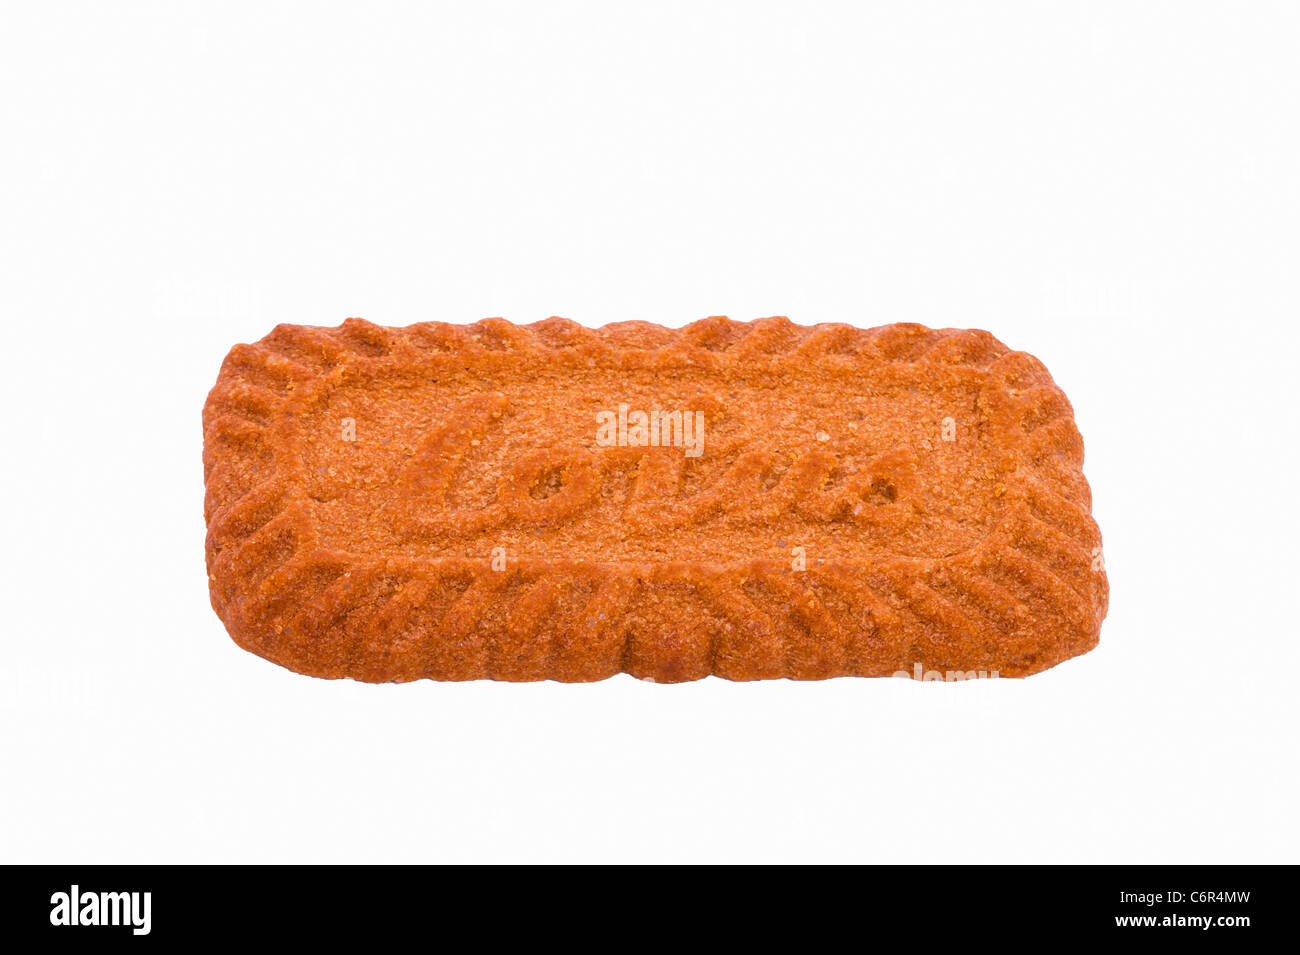 A Lotus original caramelised biscuit on a white background Stock Photo